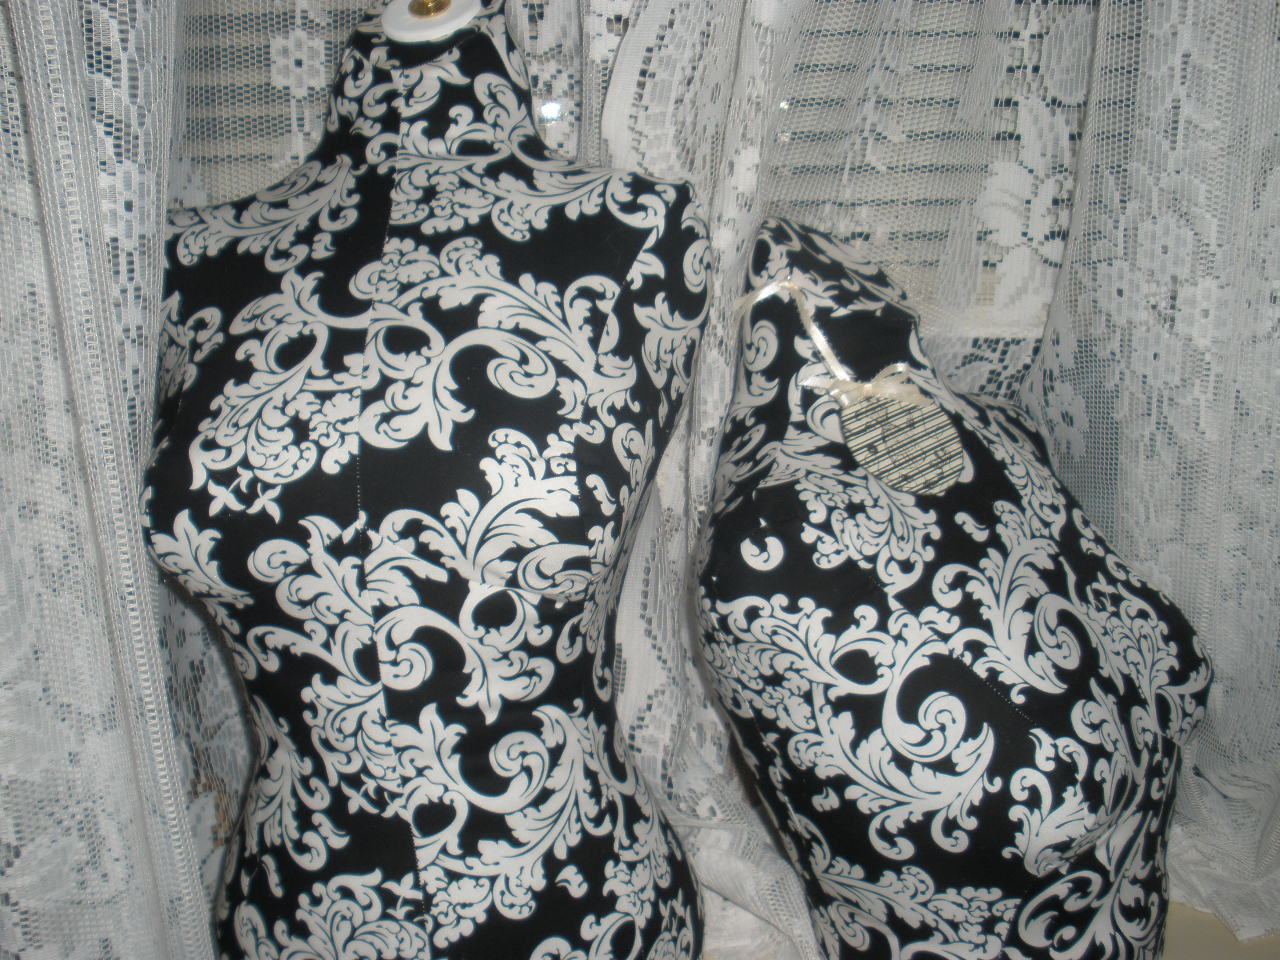 Boutique Dress Form, Bust To The Waist Set. Life Size Torso Great For Store Front Or Home Decor. Paris Black Damask Forms.